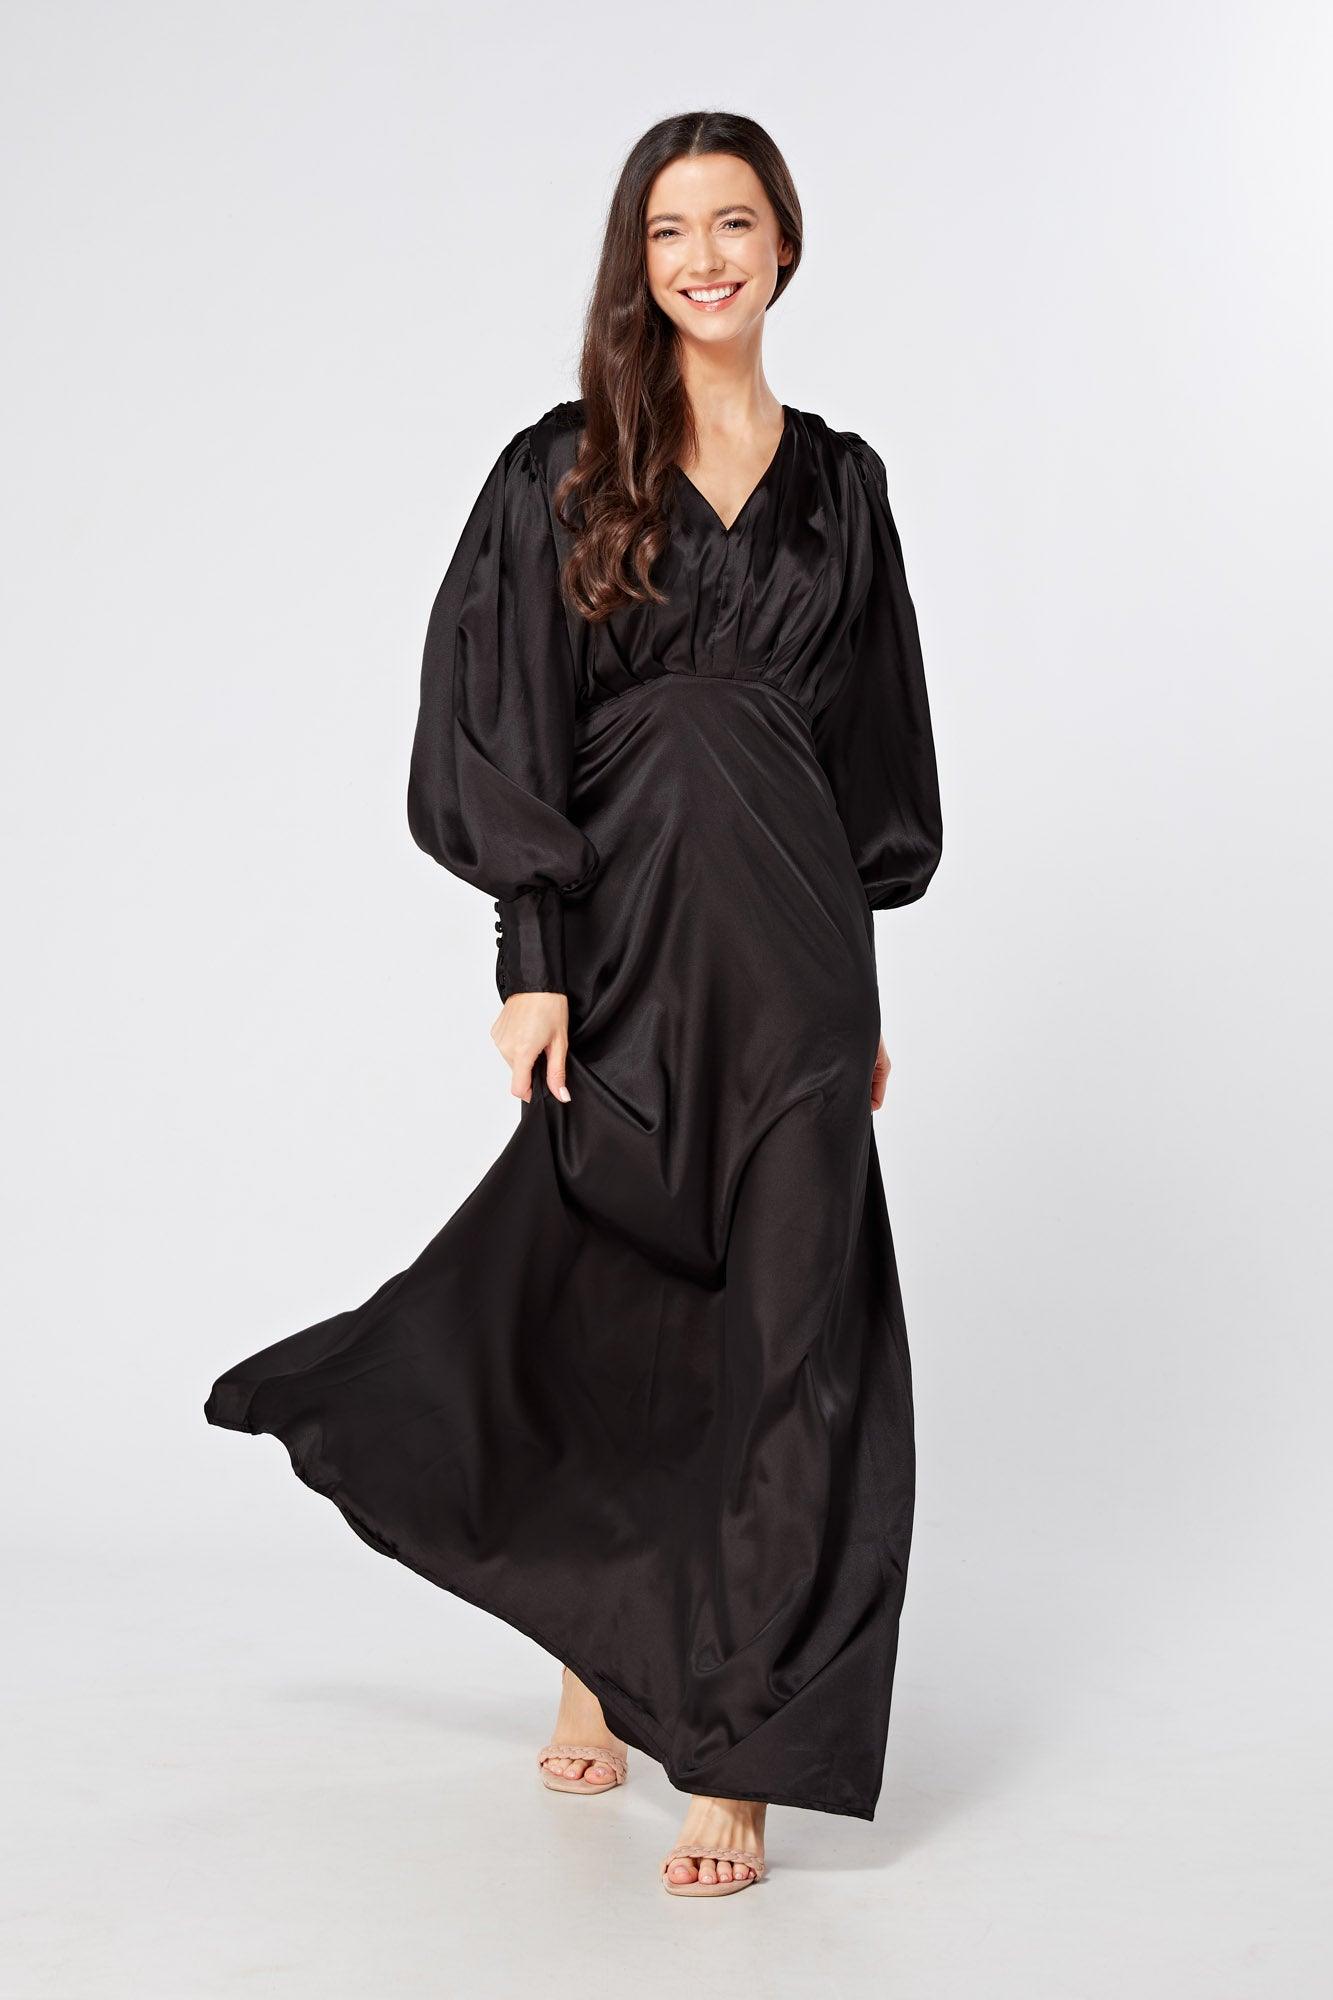 Colette Black Satin Maxi Gown with long sleeves - TAHLIRA